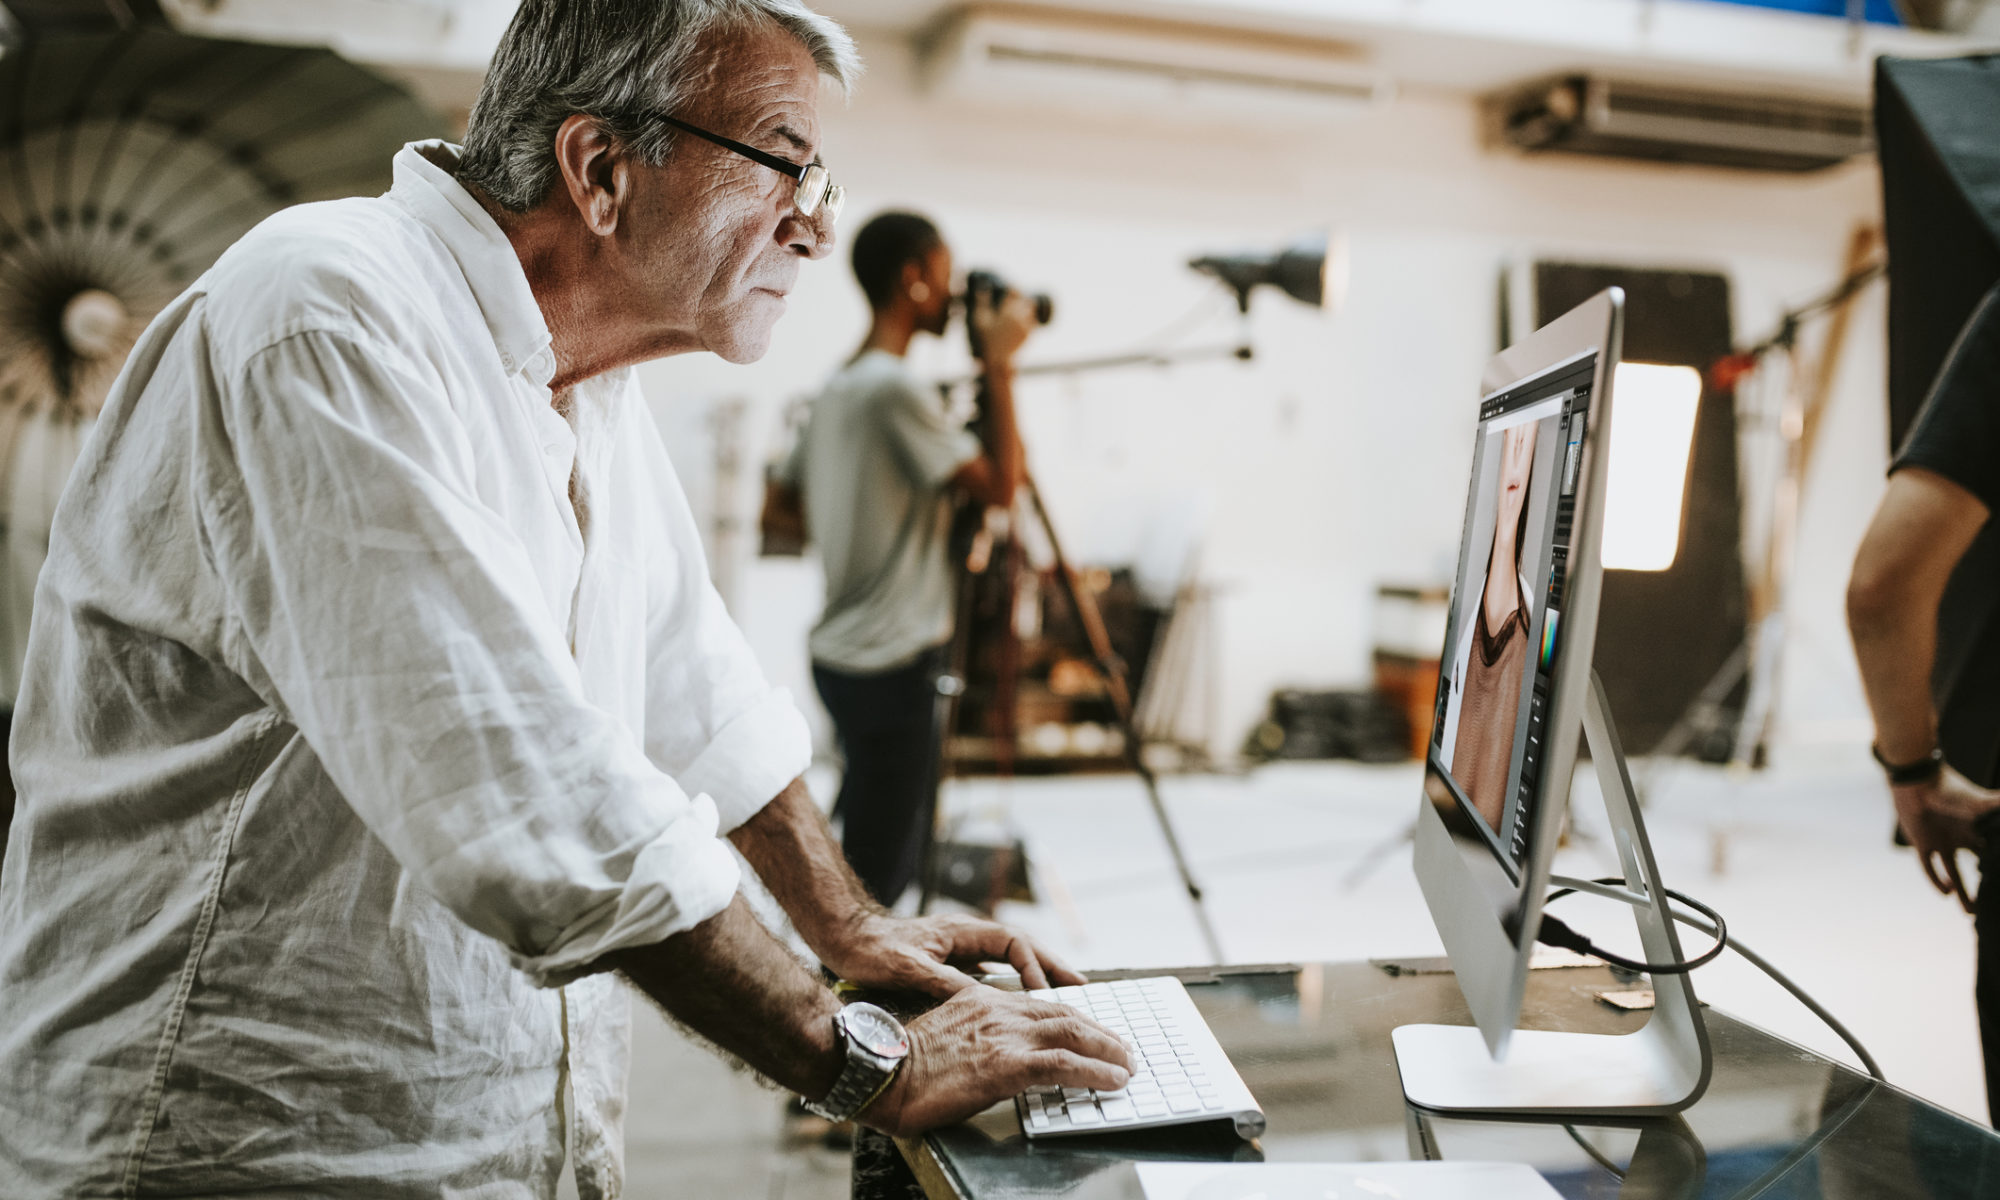 A male photographer wearing a loose, casual white shirt is stood at a desktop computer editing images whilst a photoshoot is going on in the background